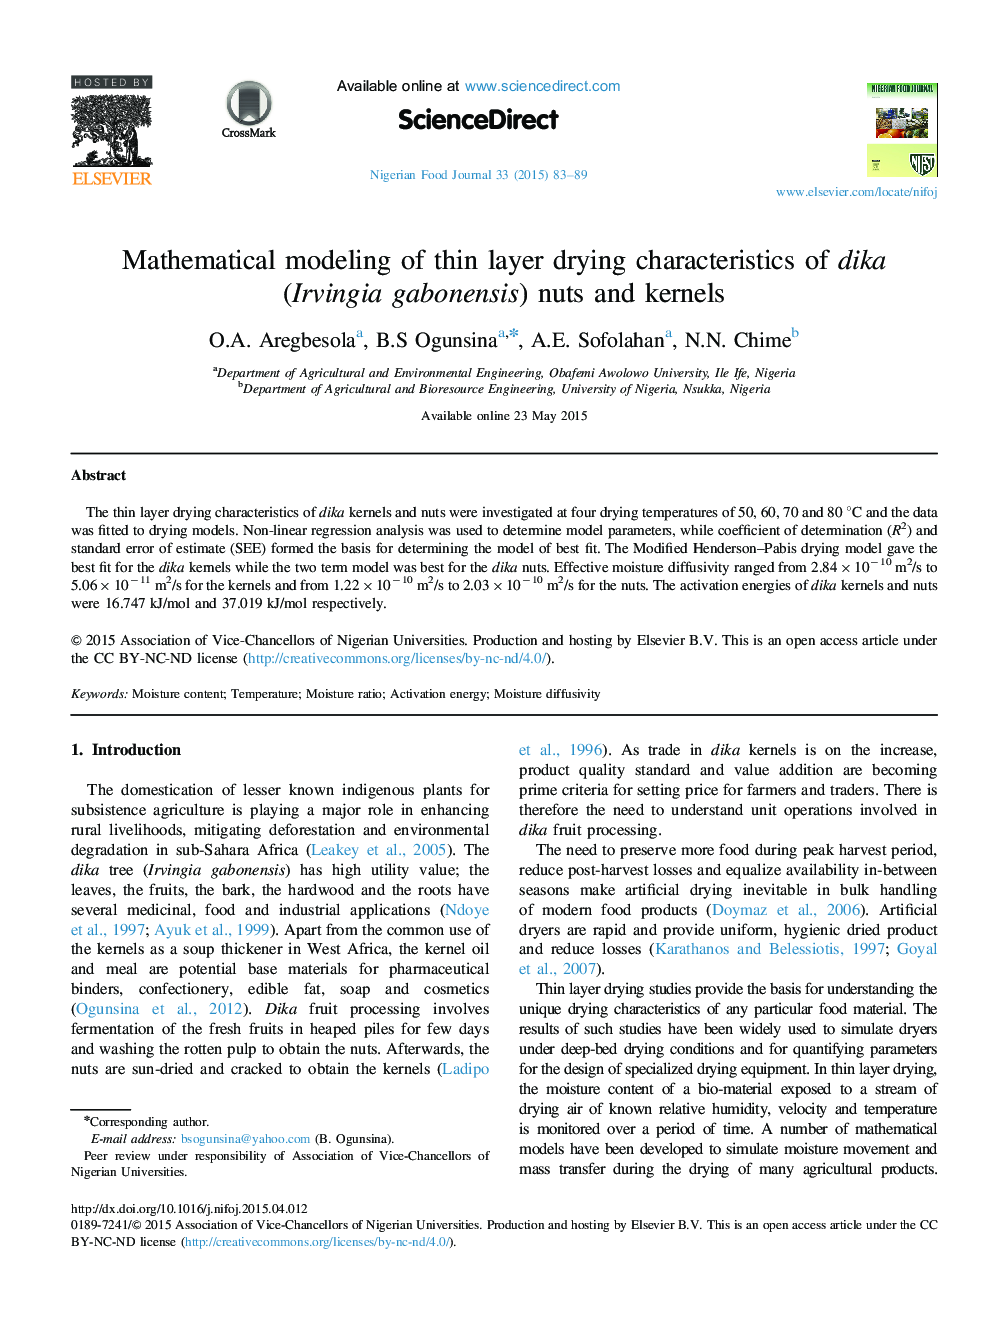 Mathematical modeling of thin layer drying characteristics of dika (Irvingia gabonensis) nuts and kernels 